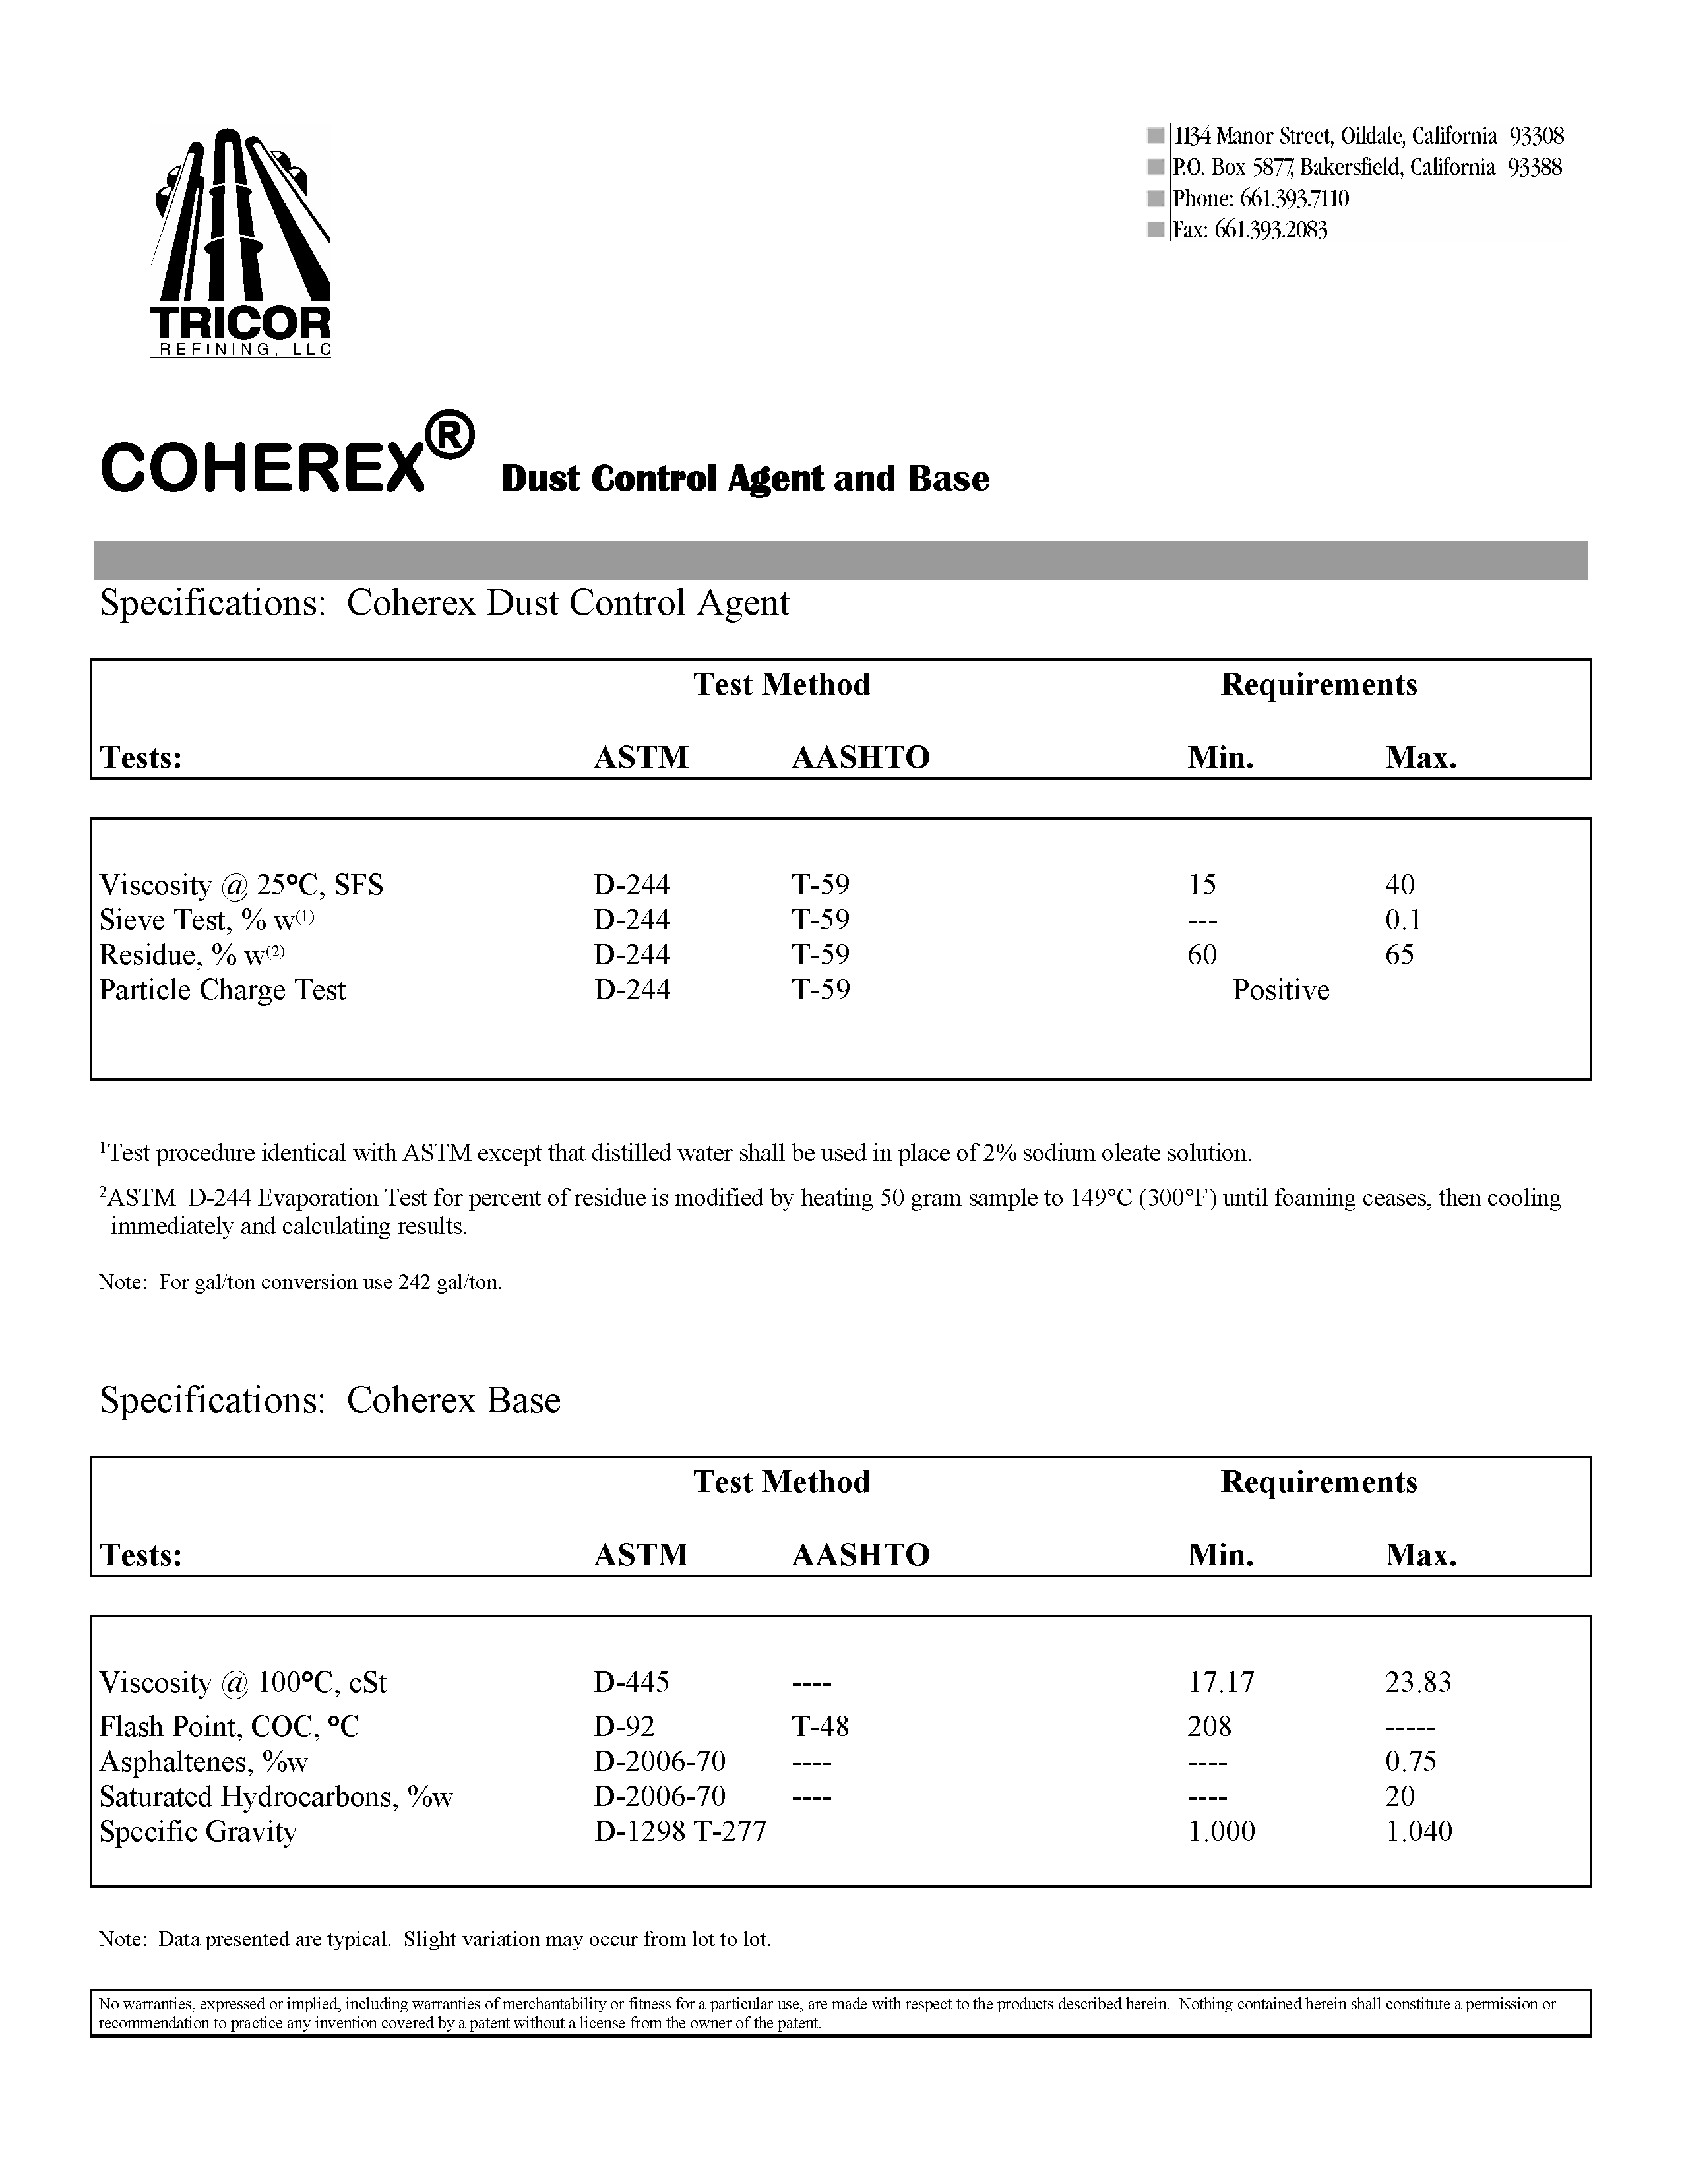 Coherex Specification Sheet